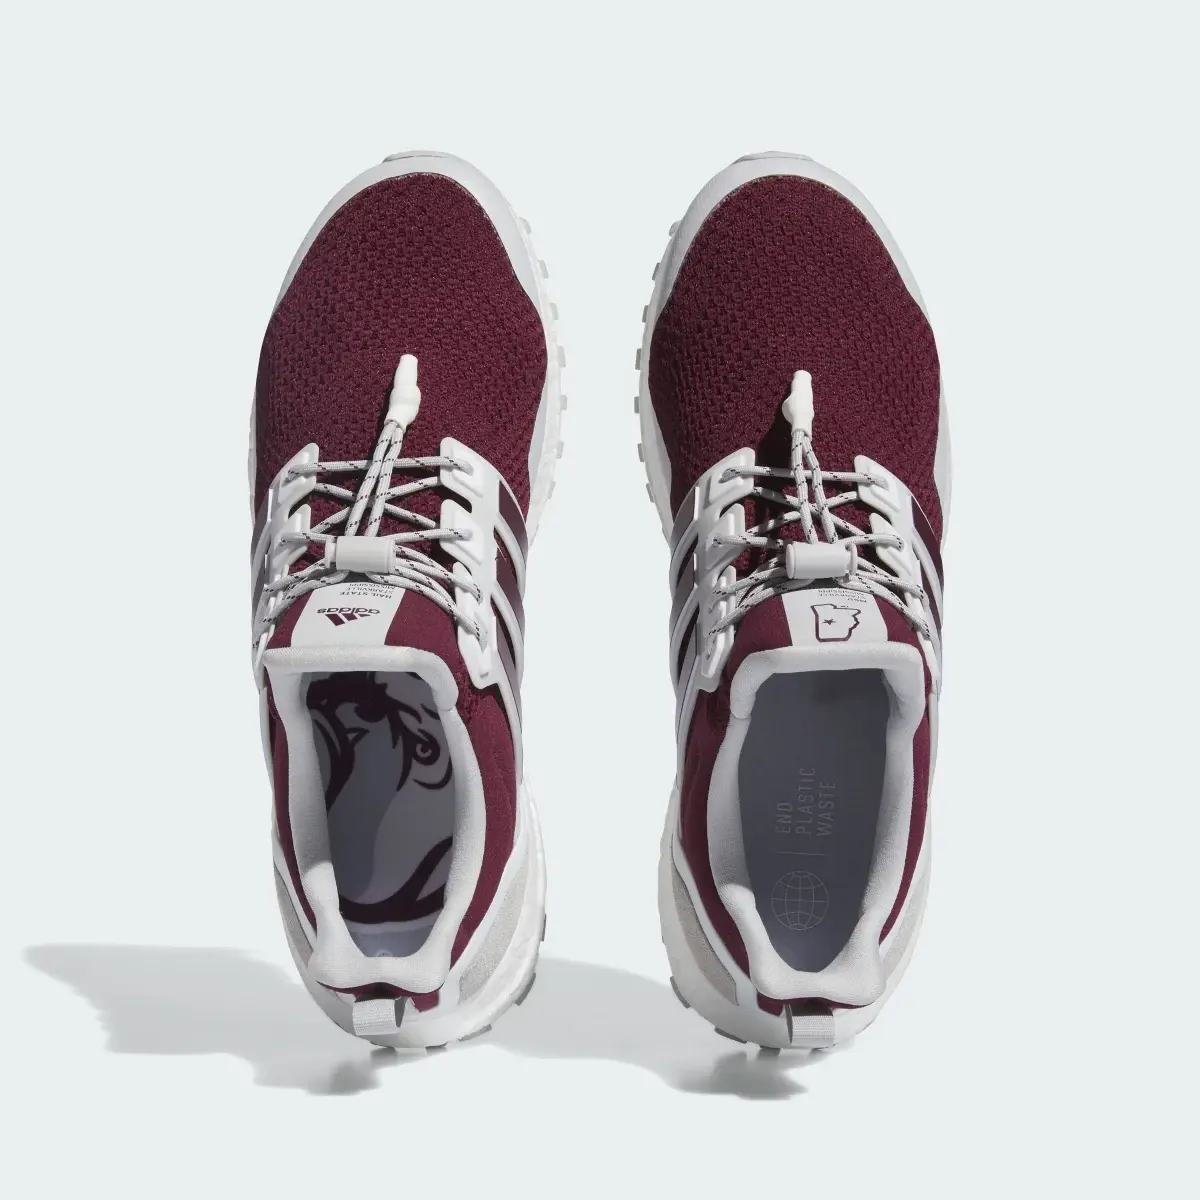 Adidas Mississippi State Ultraboost 1.0 Shoes. 3